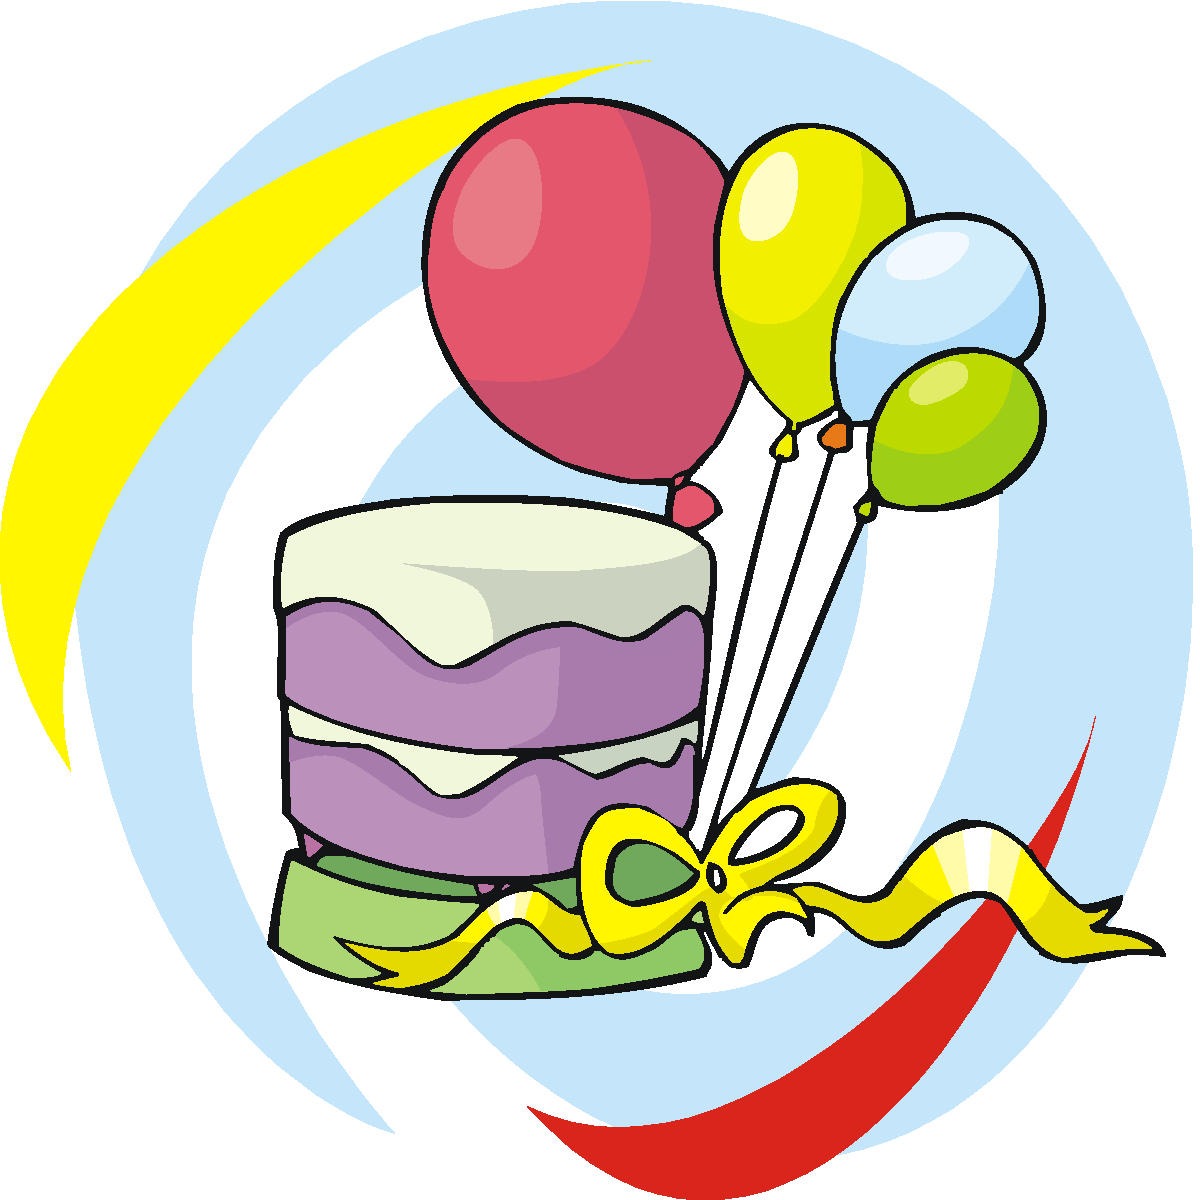 Birthday Balloons And Cake Clip Art - Free Clipart ...